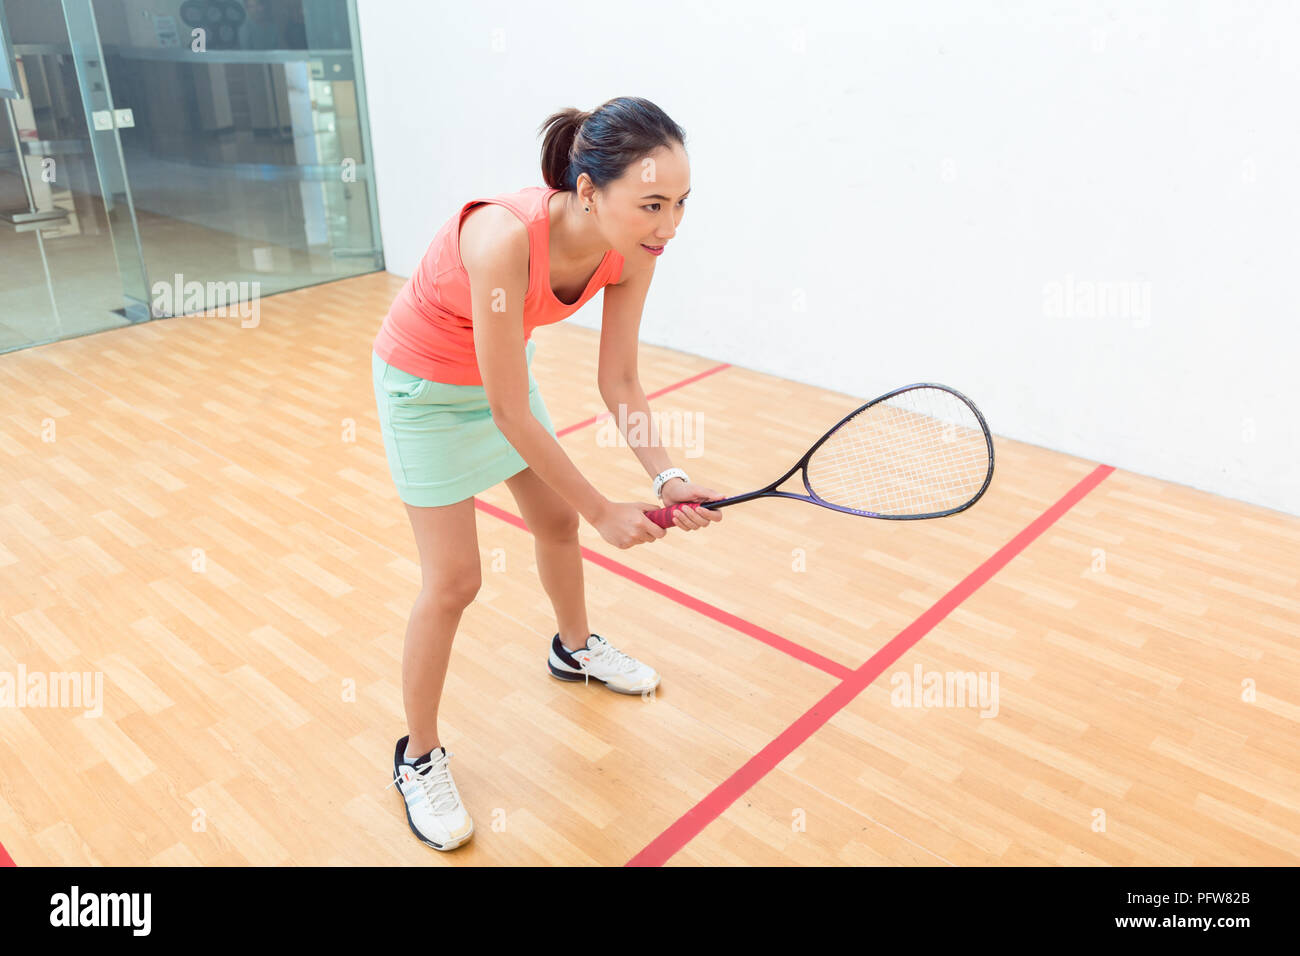 Young squash player holding the racket during game on a professional court Stock Photo